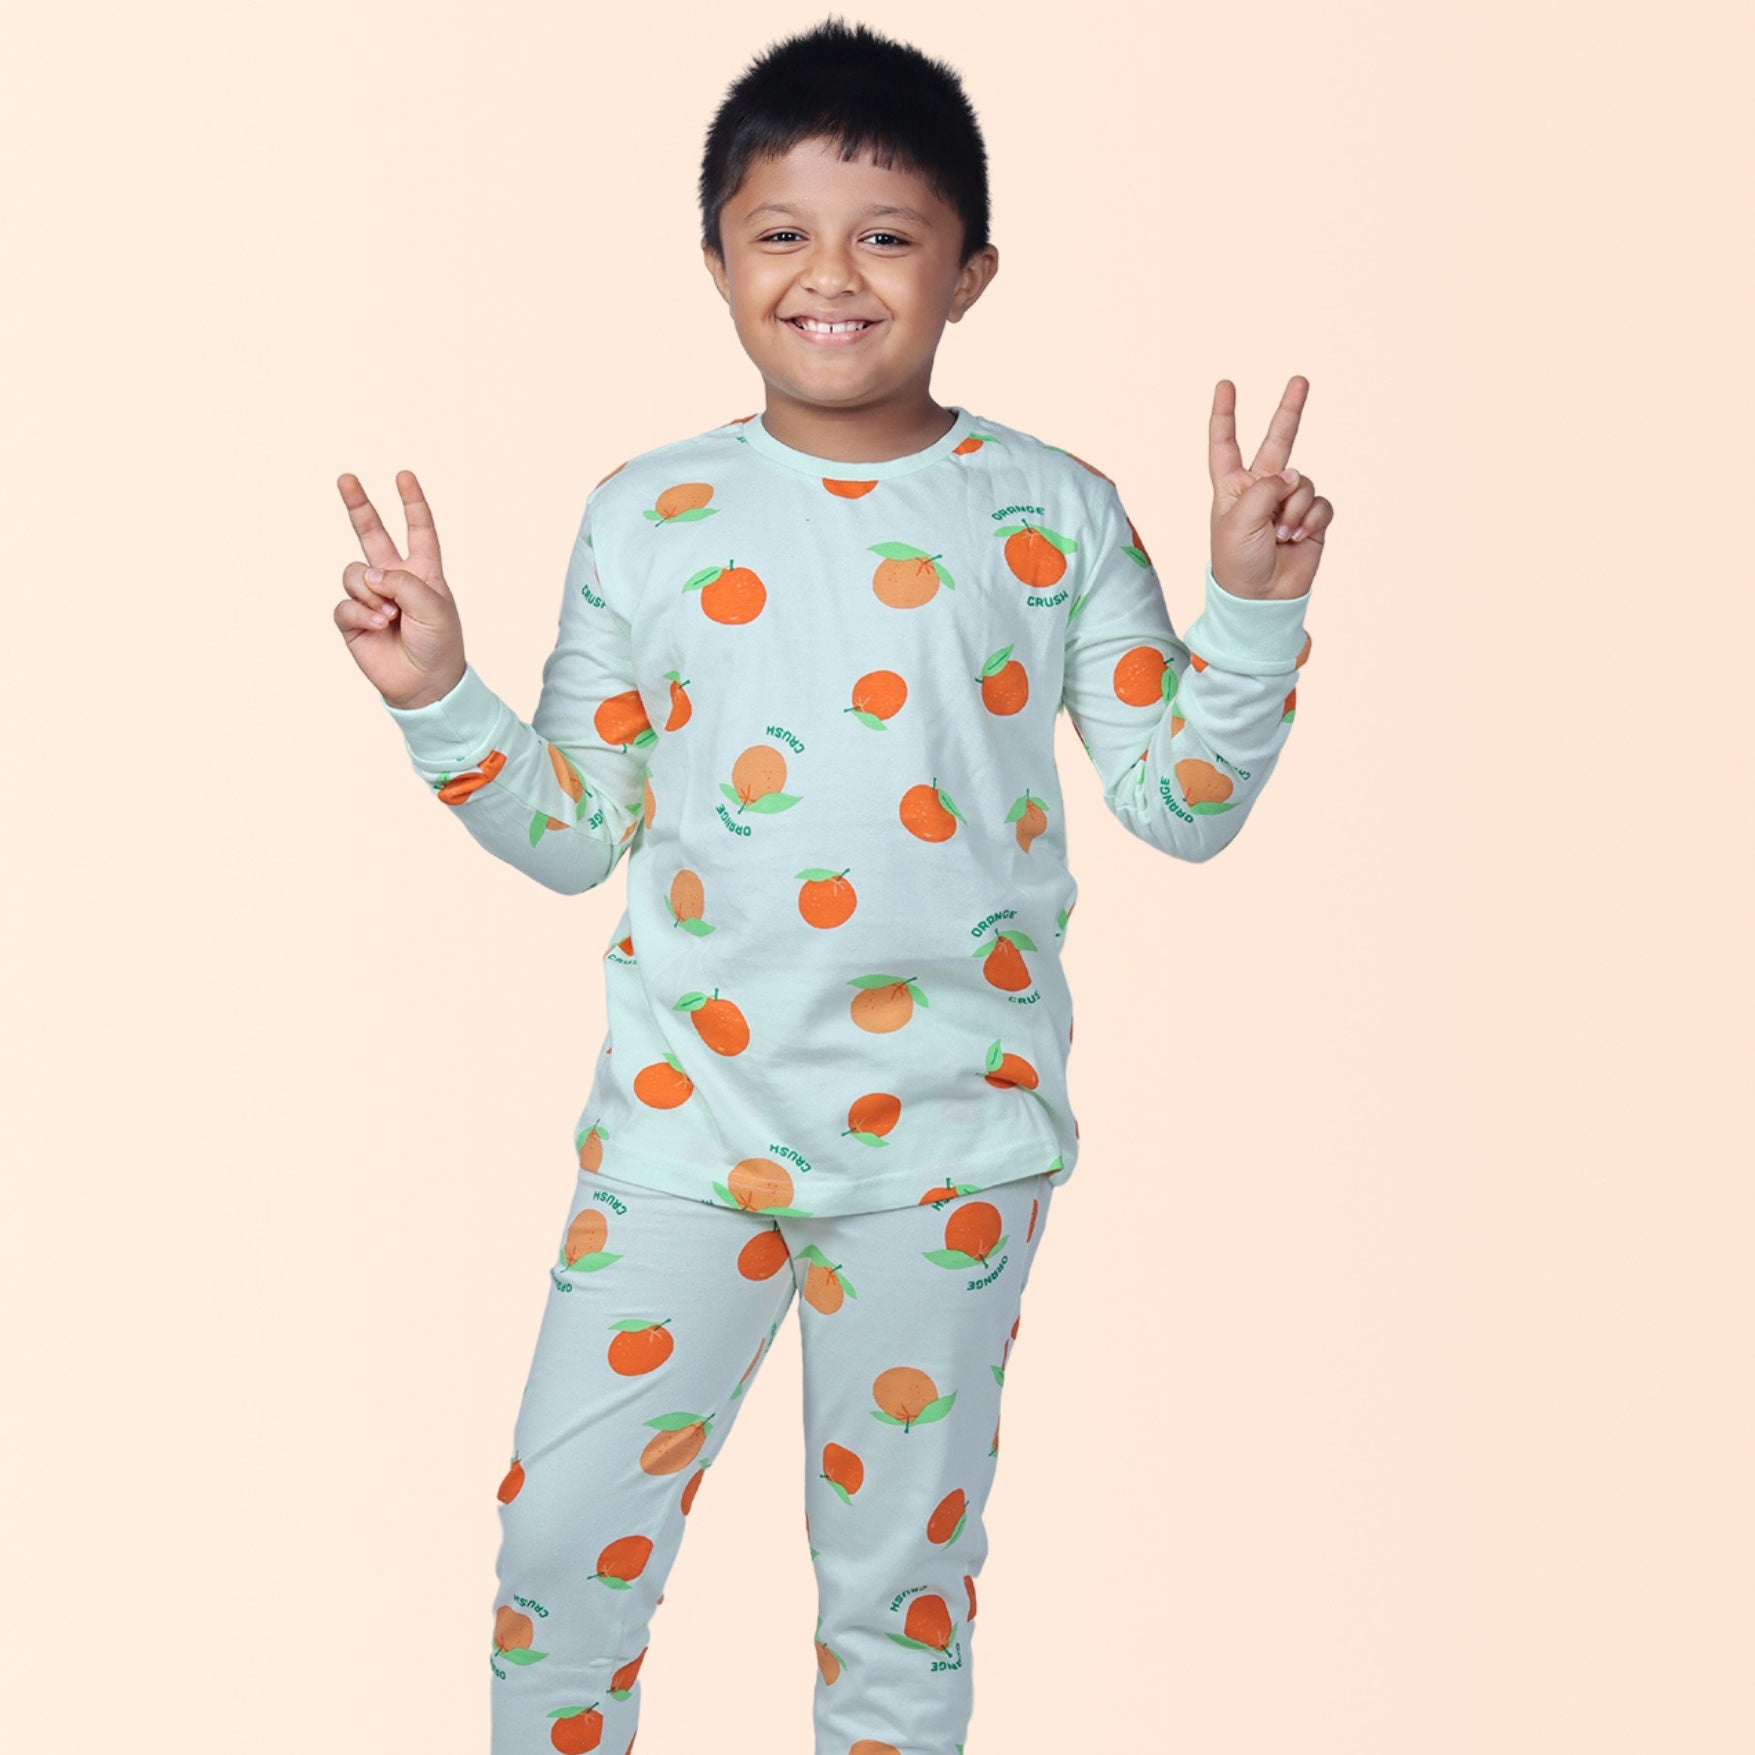 Full Sleeve Night Suit For Boy In Green Colour - Orange